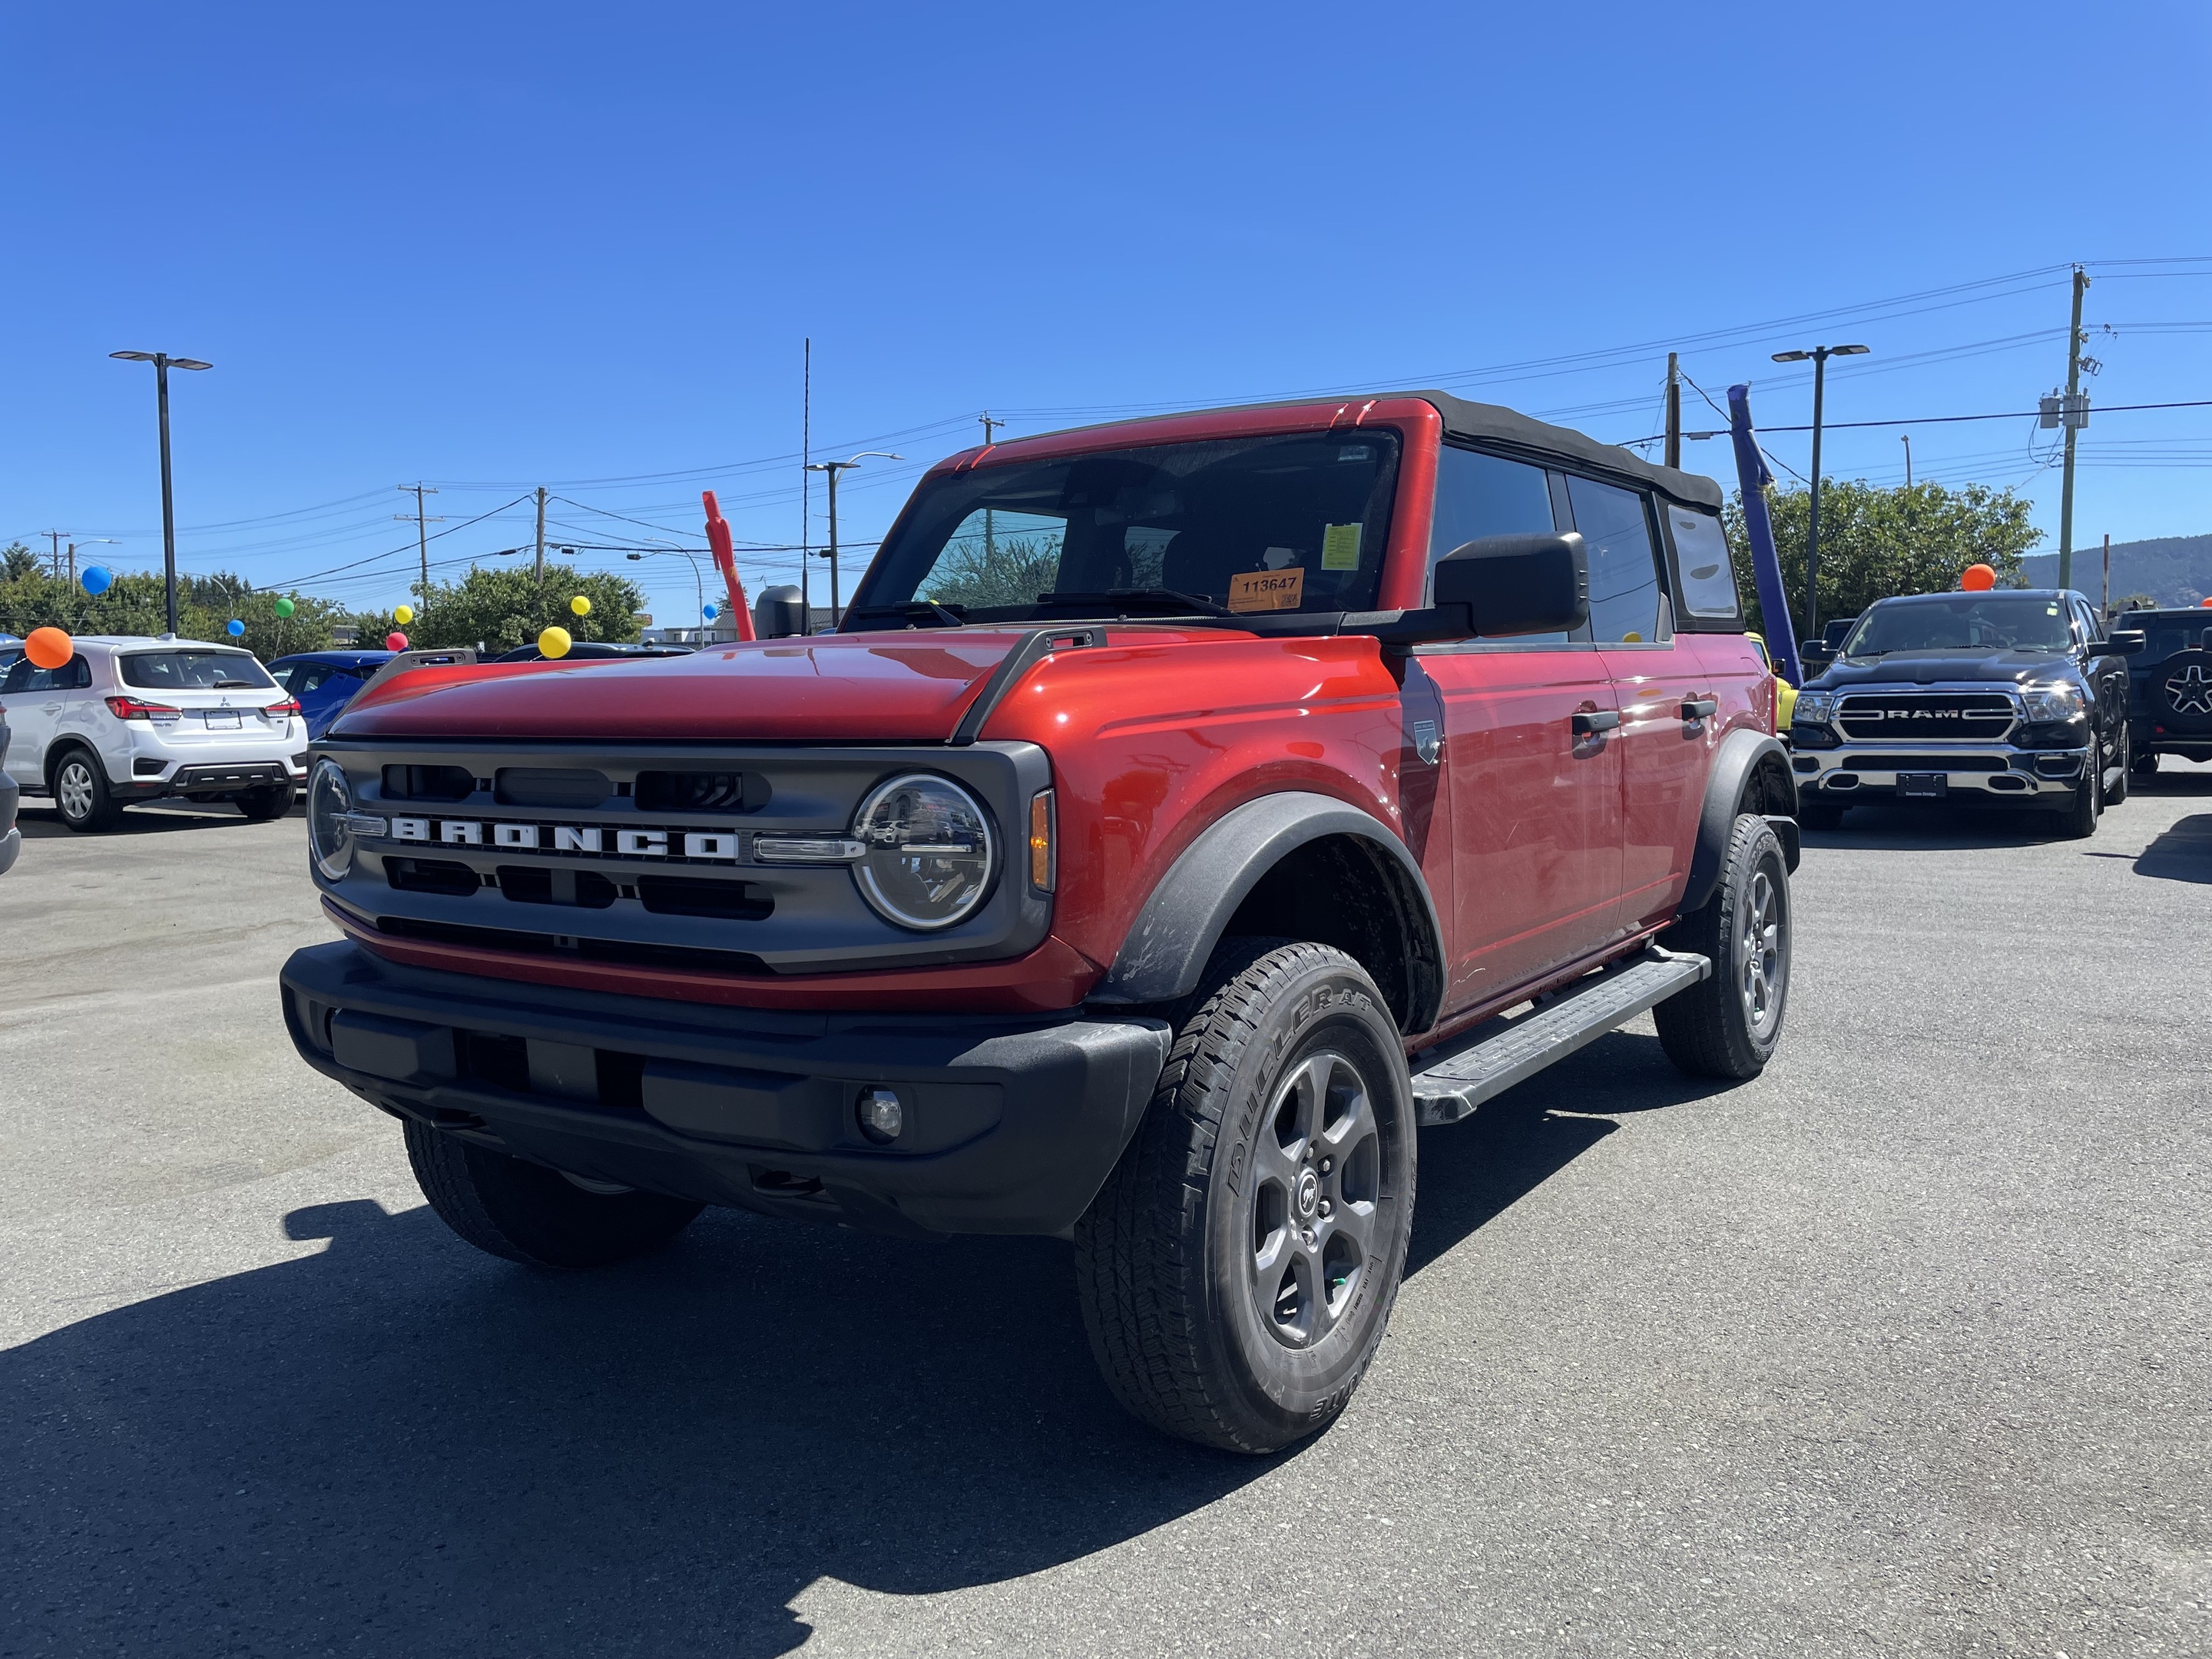 2022 Ford Bronco No Accidents, Low KM, A/C, Removable Doors and Top